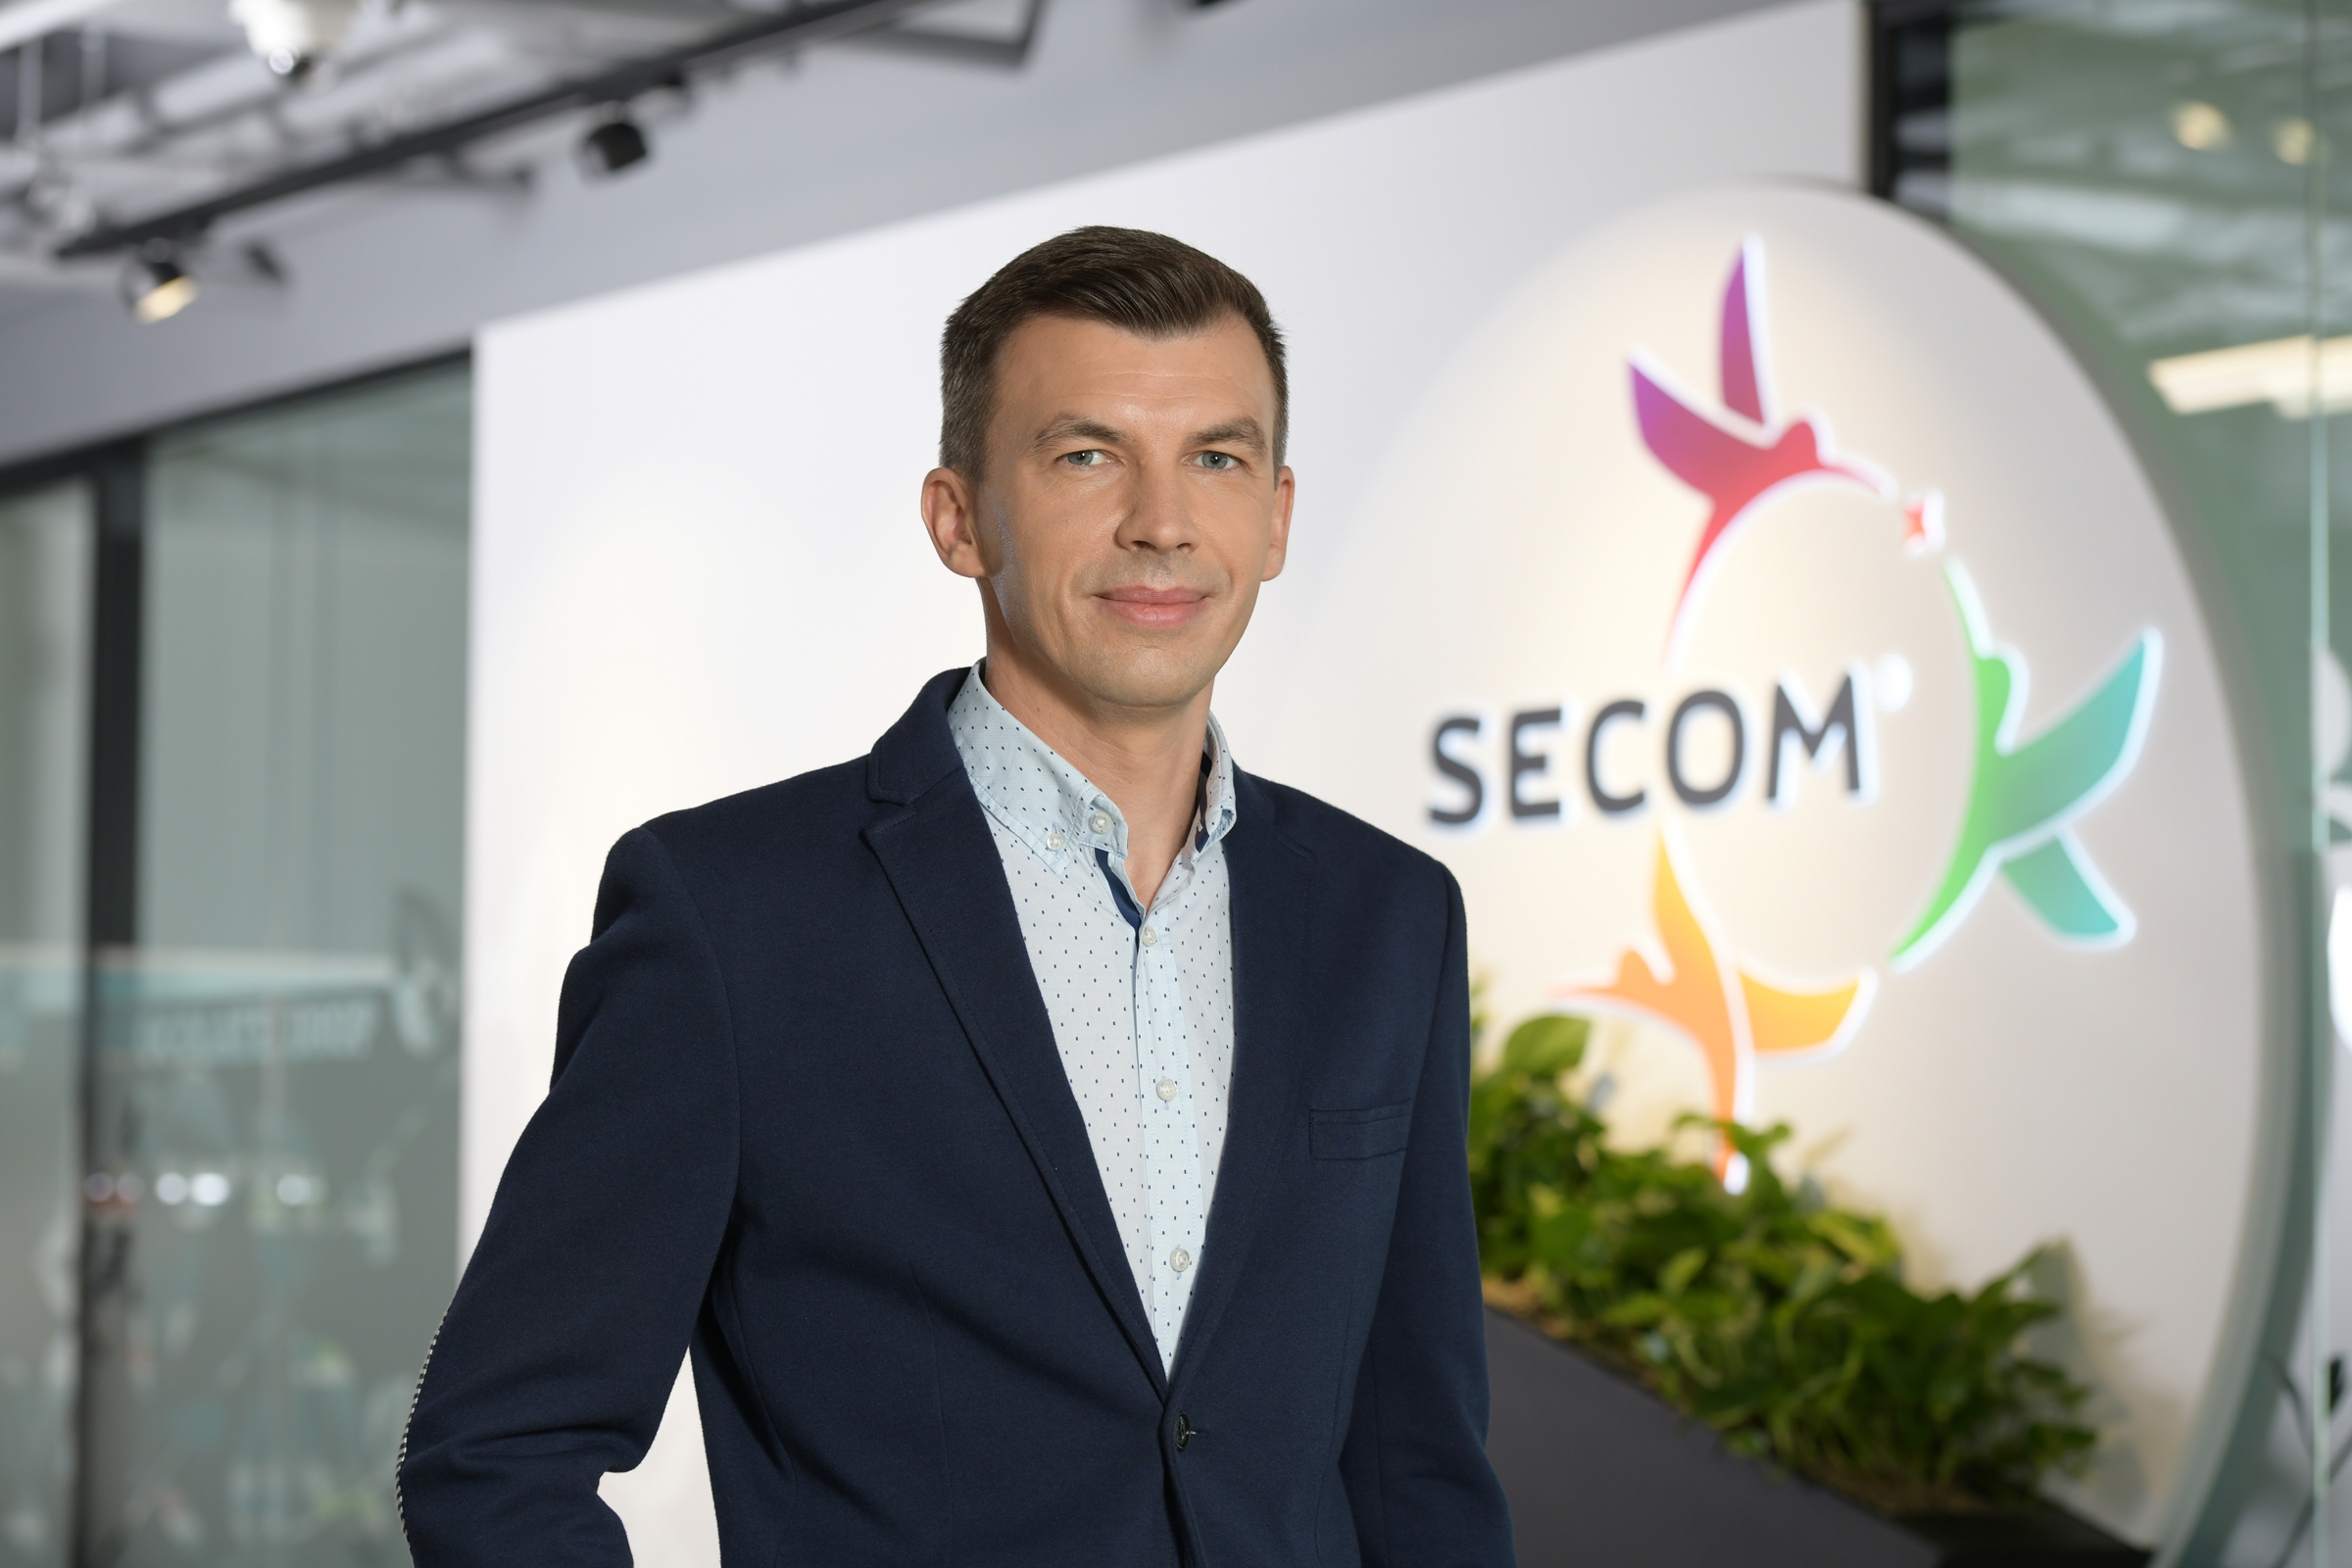 Secom® continues its investments in the national retail network